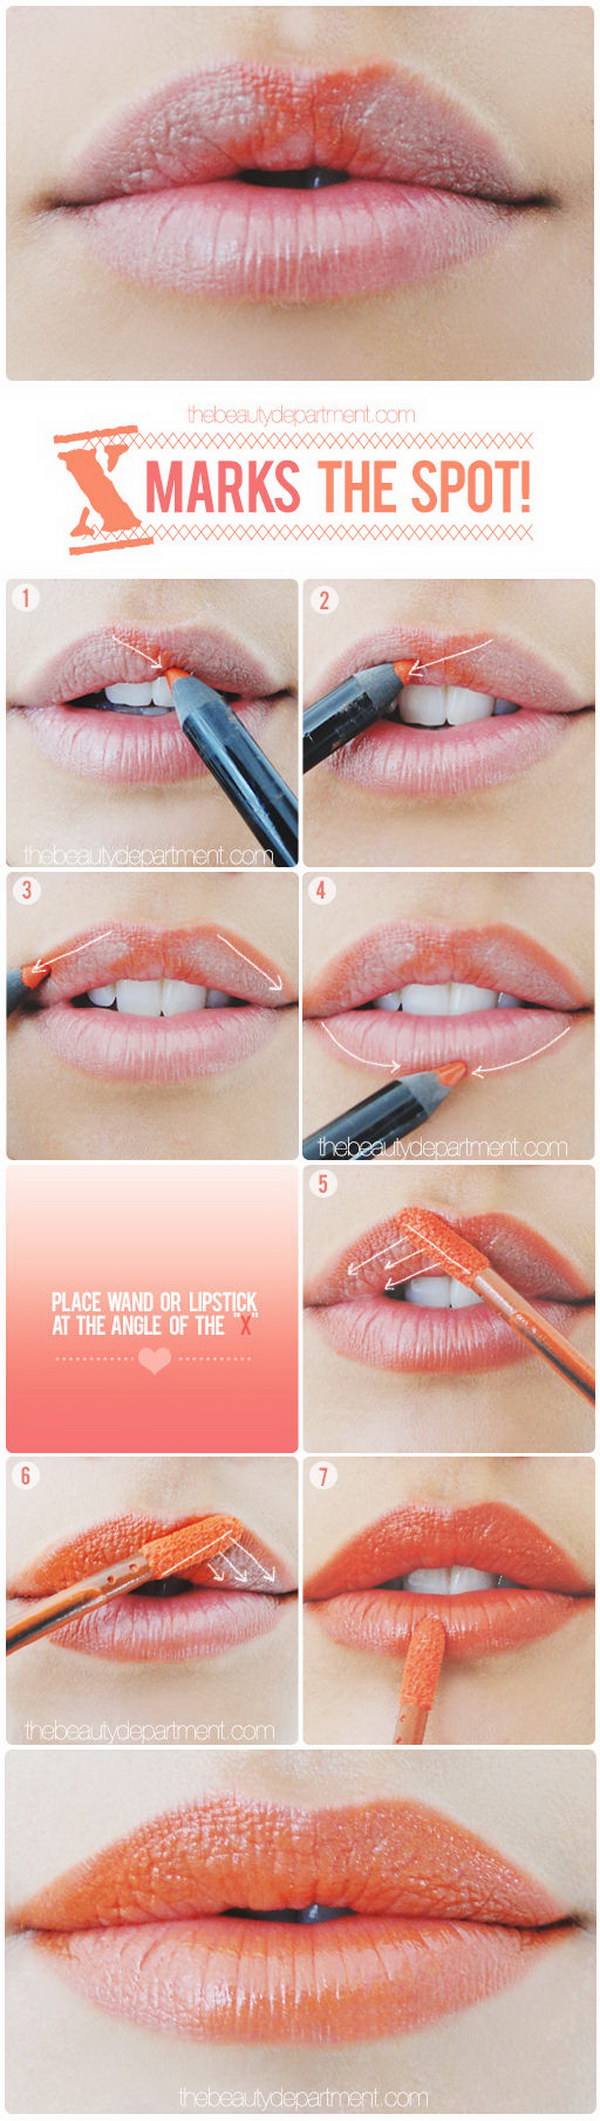 Make a Subtle Difference with X Markers on Your Upper Lip. 